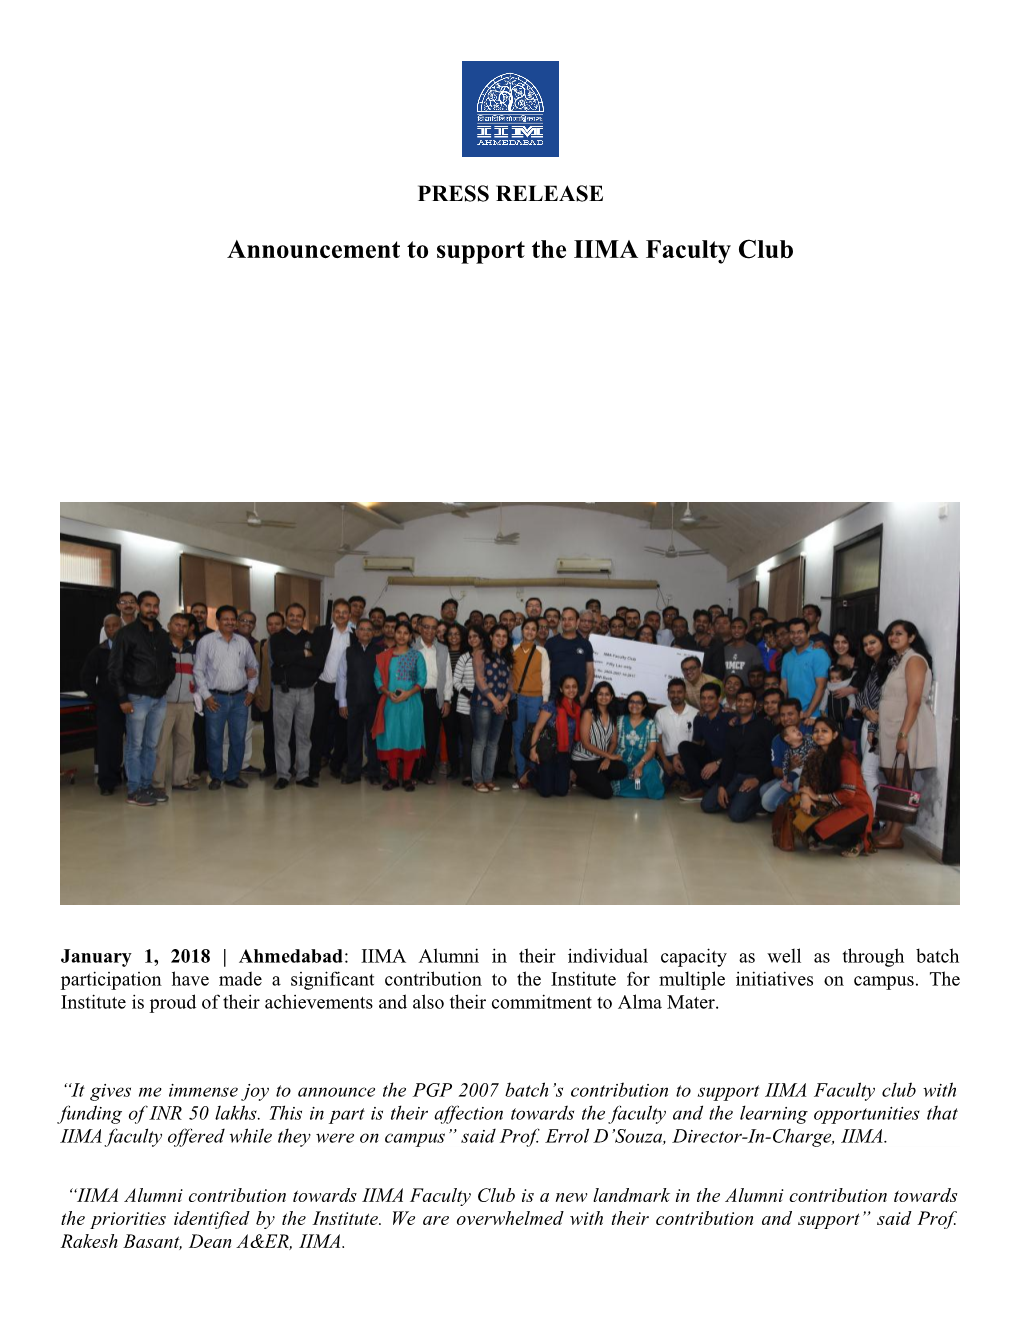 Announcement to Support the IIMA Faculty Club